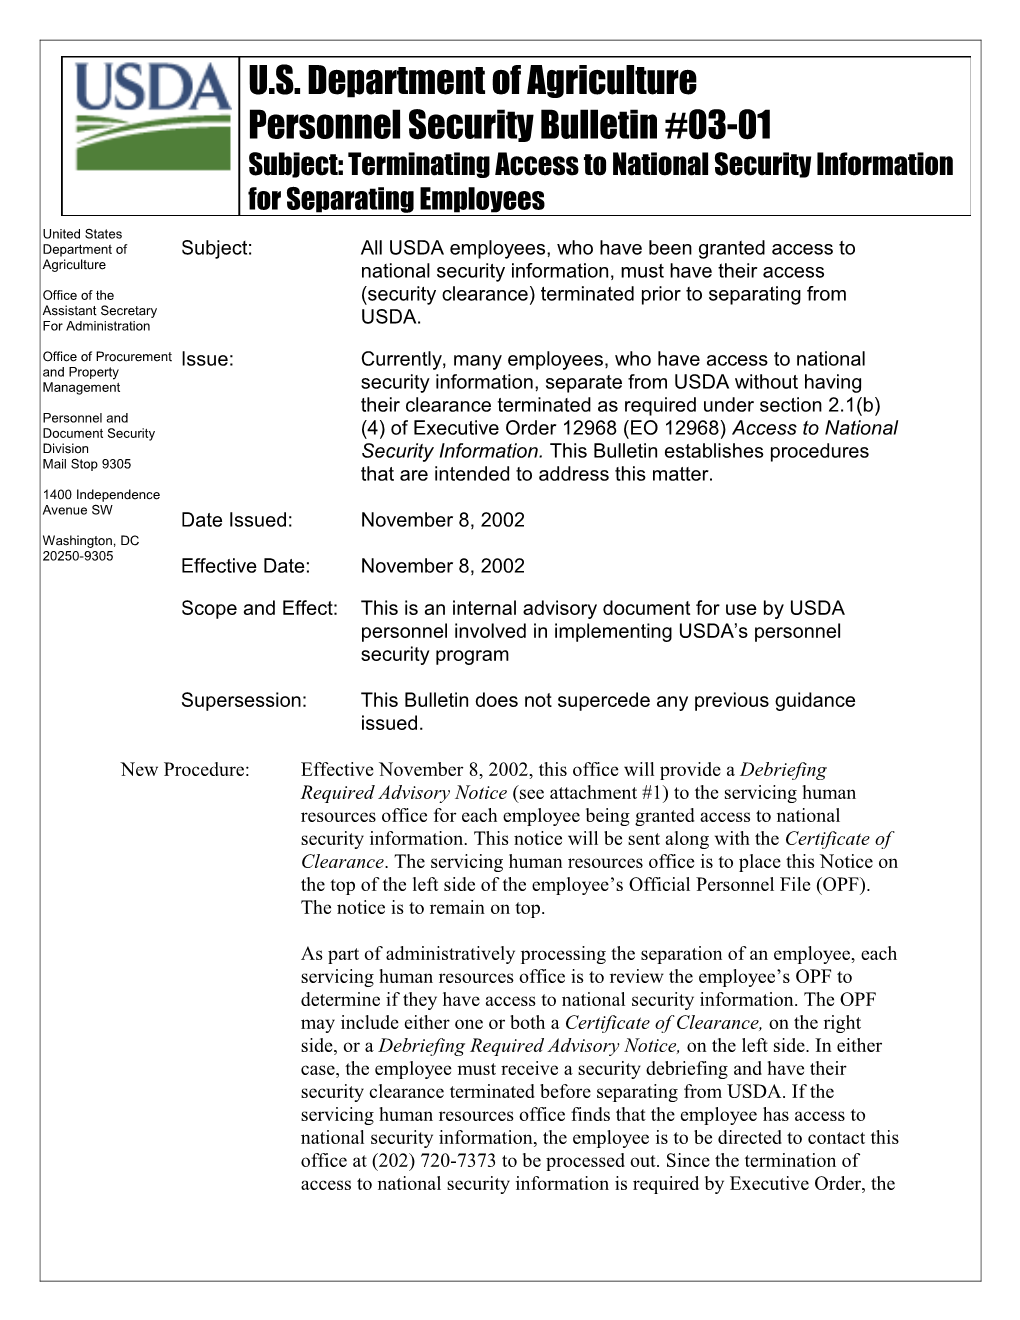 Subject:All USDA Employees, Who Have Been Granted Access to National Security Information